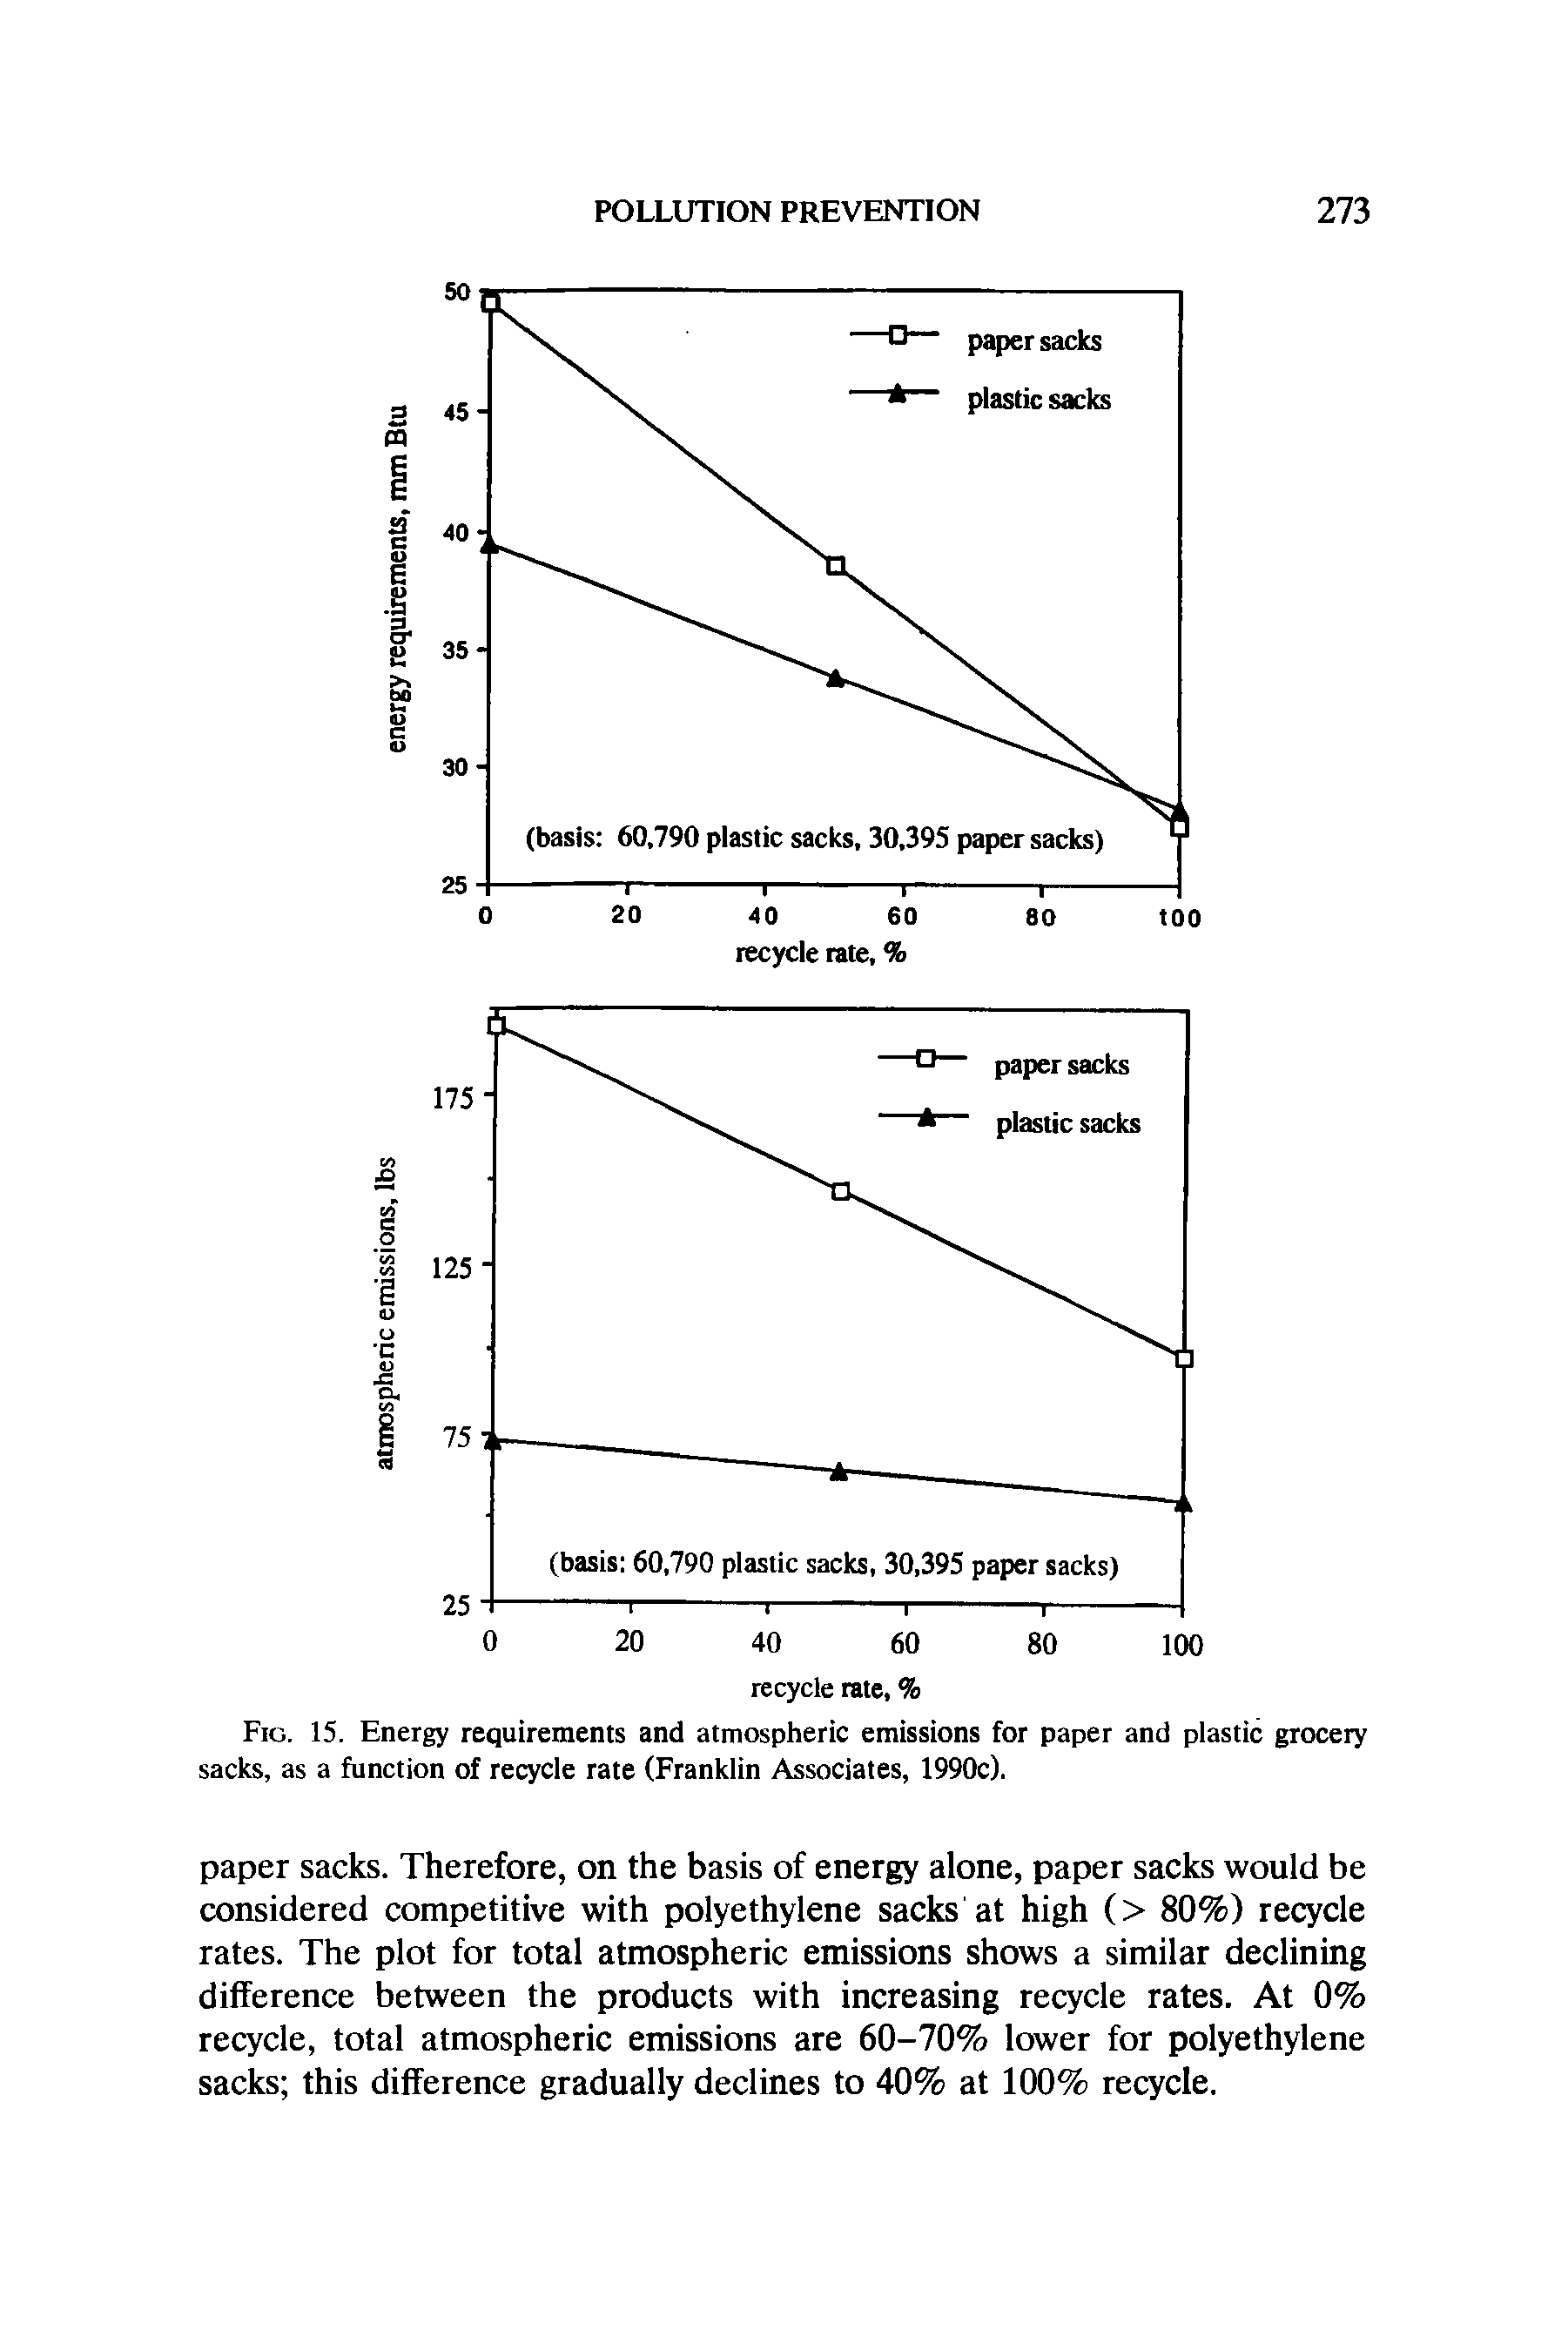 Fig. 15. Energy requirements and atmospheric emissions for paper and plastic grocery sacks, as a function of recycle rate (Franklin Associates, 1990c).